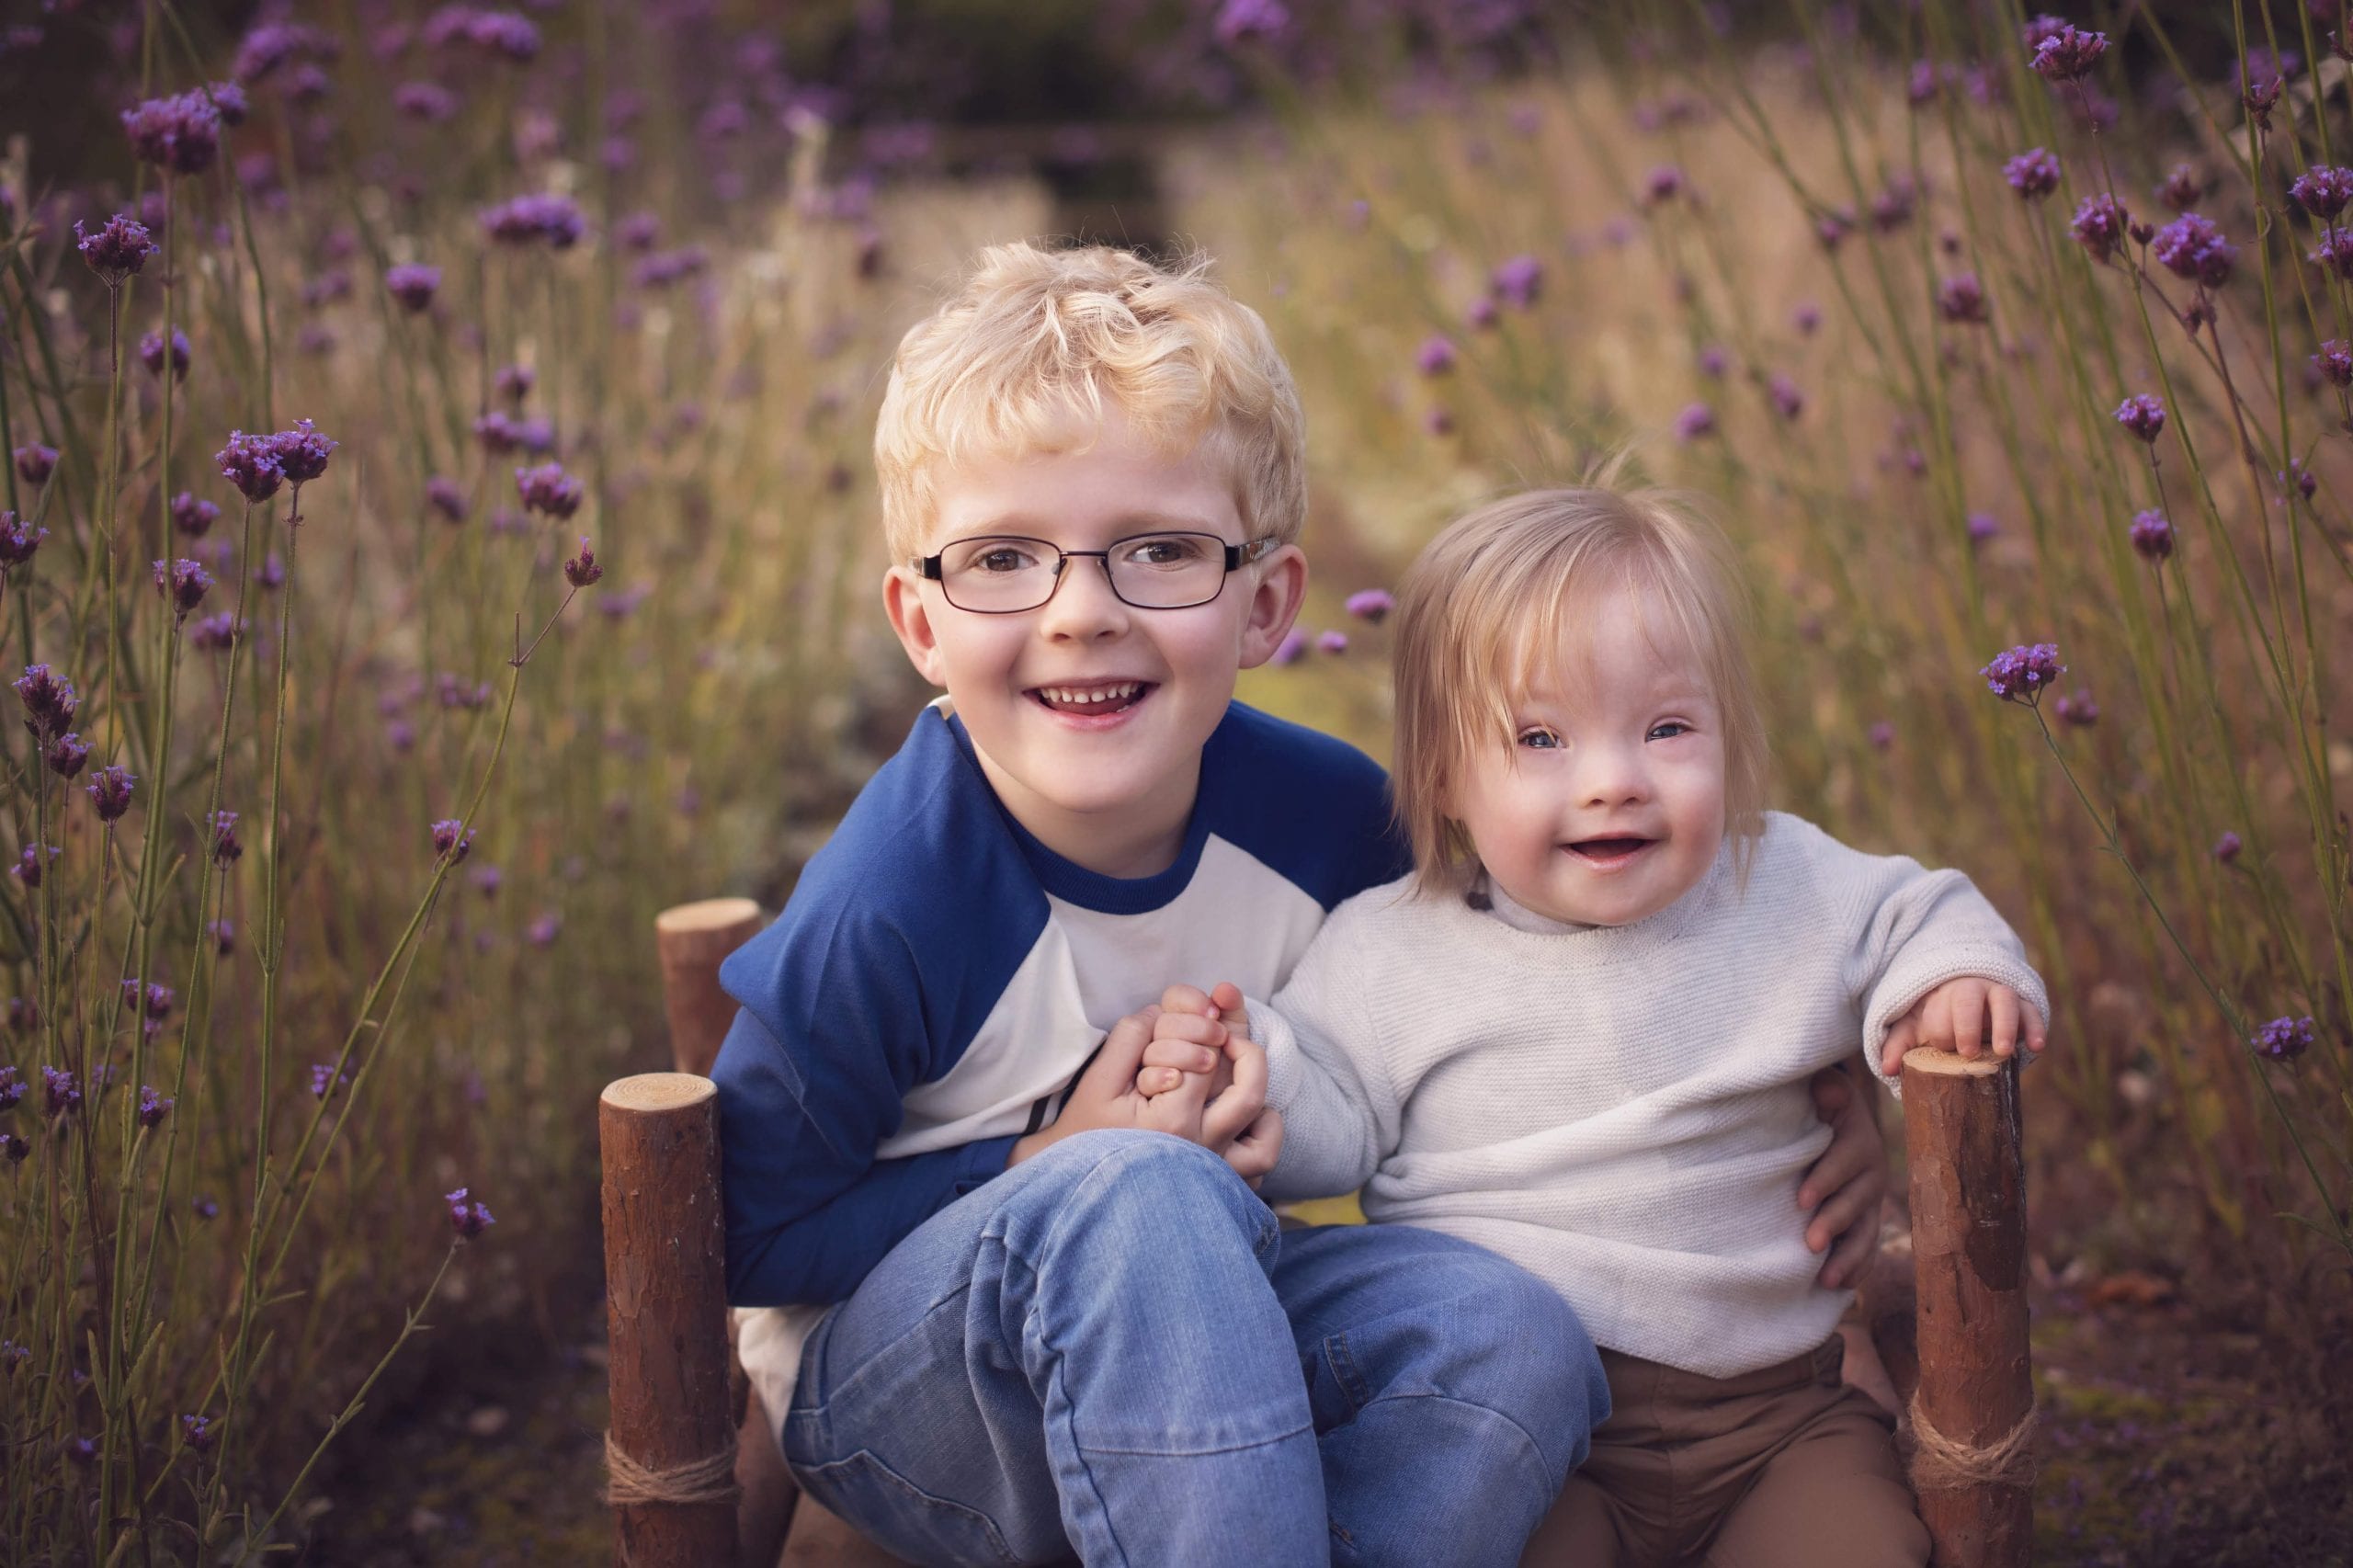 Two brothers sit in a meadow. The younger boy has Down syndrome. Photo credit www.photographybylorna.co.uk